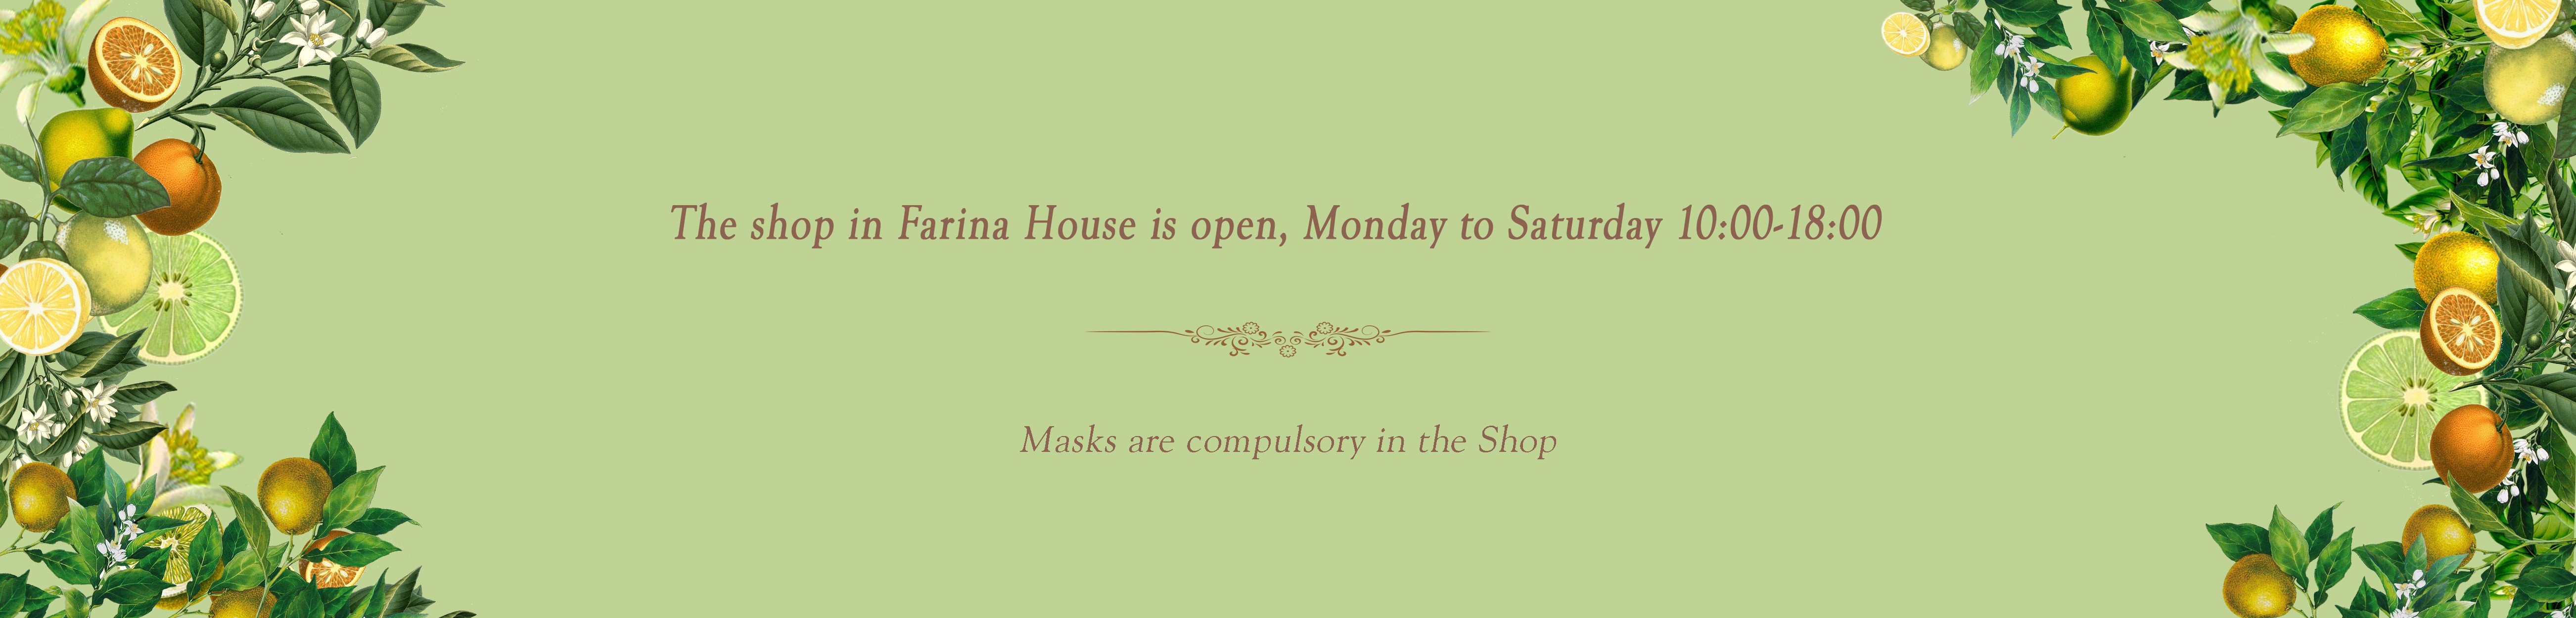 The shop in Farina House is open again